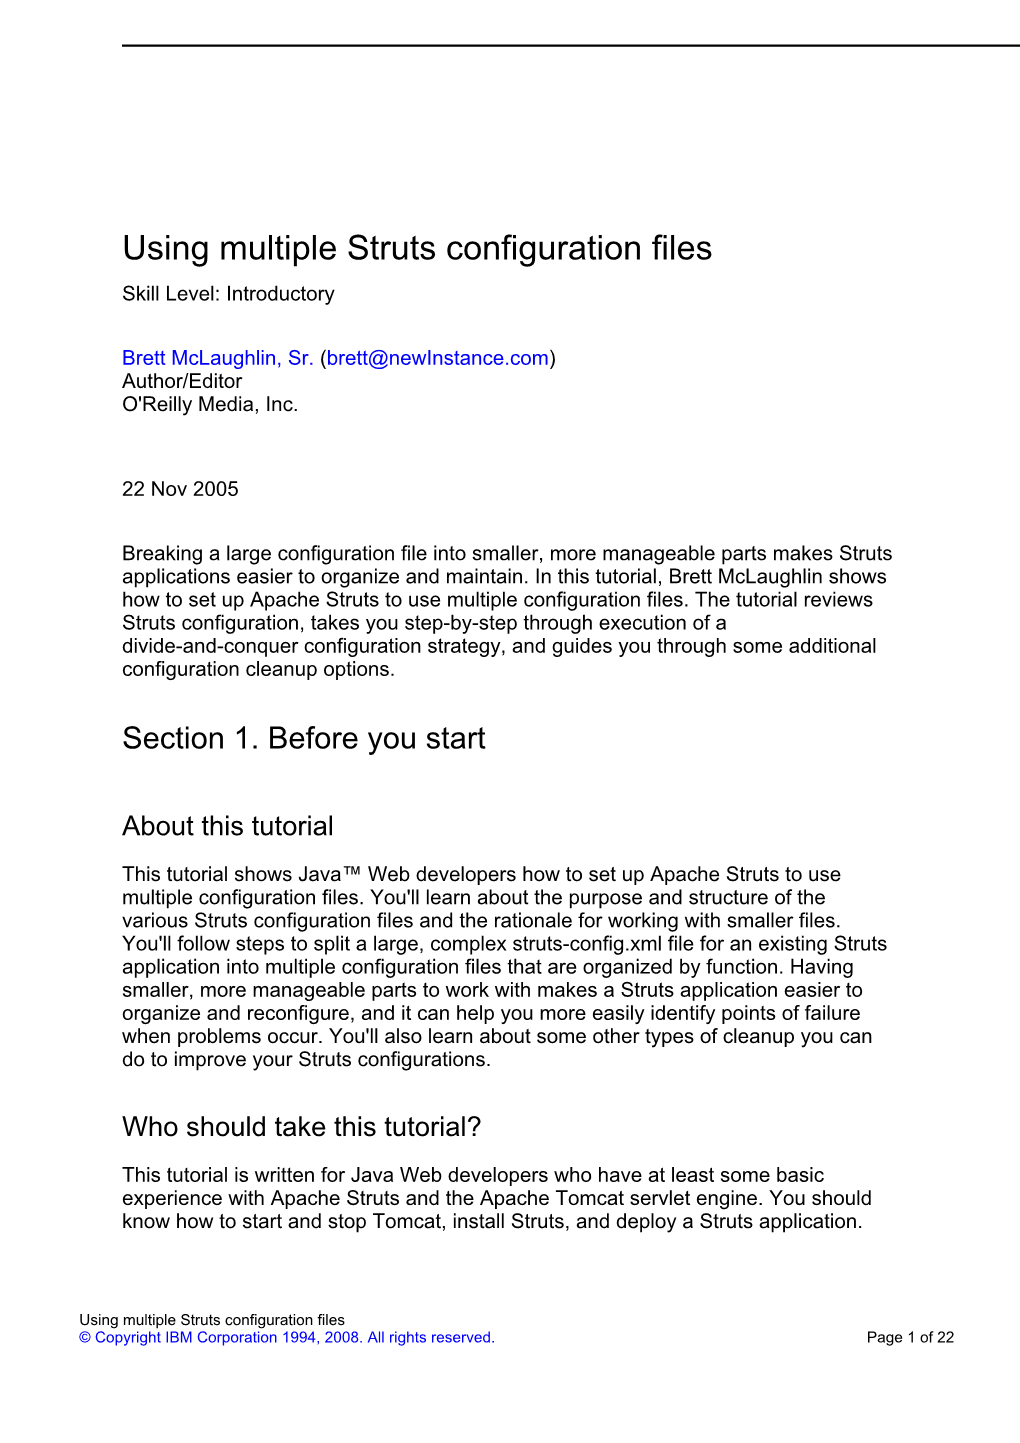 Using Multiple Struts Configuration Files Skill Level: Introductory